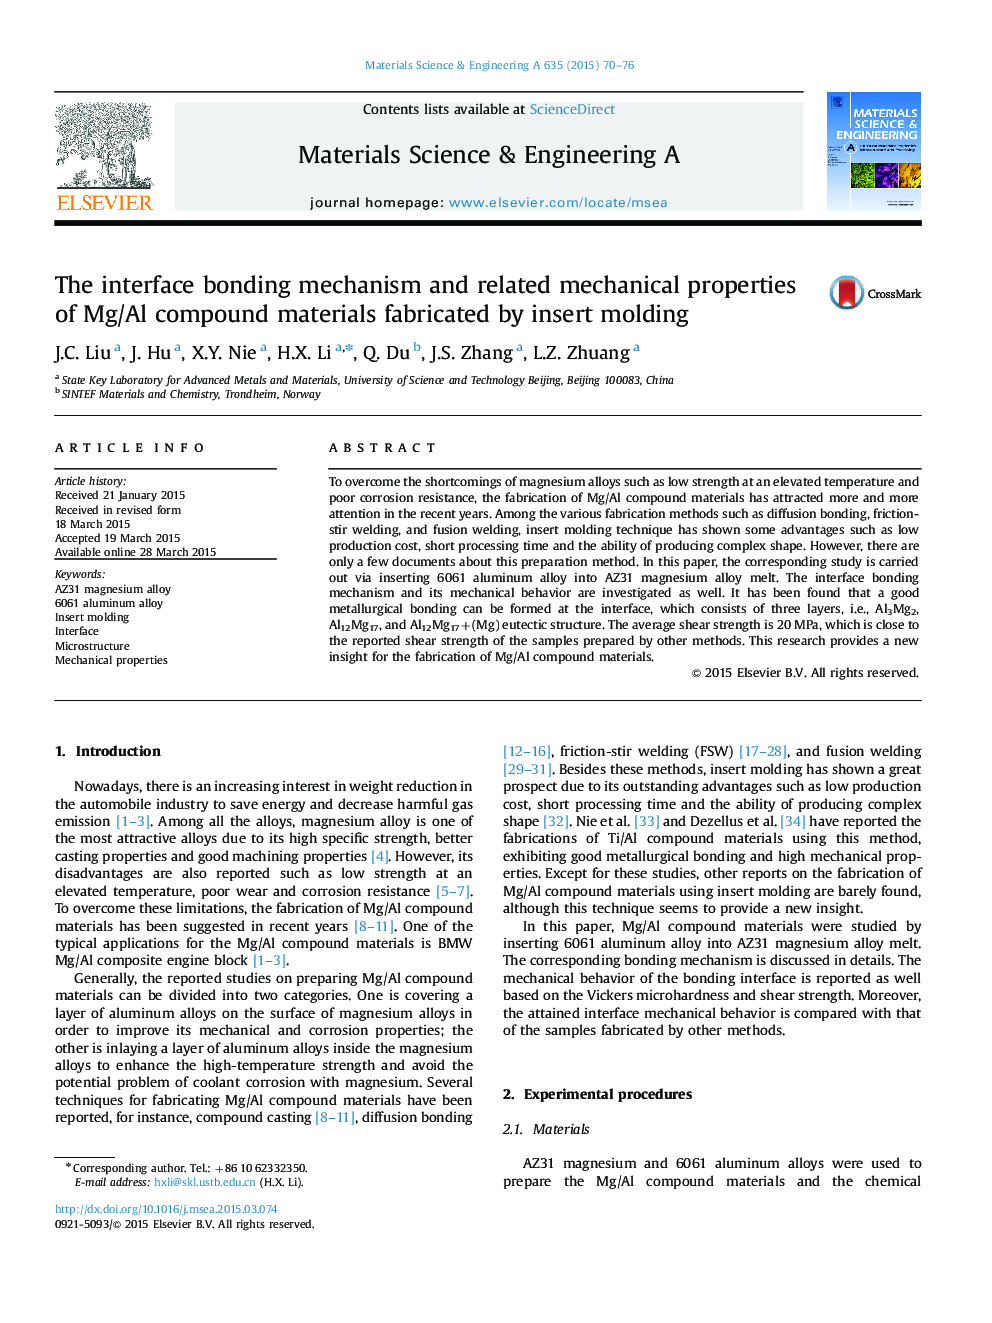 The interface bonding mechanism and related mechanical properties of Mg/Al compound materials fabricated by insert molding